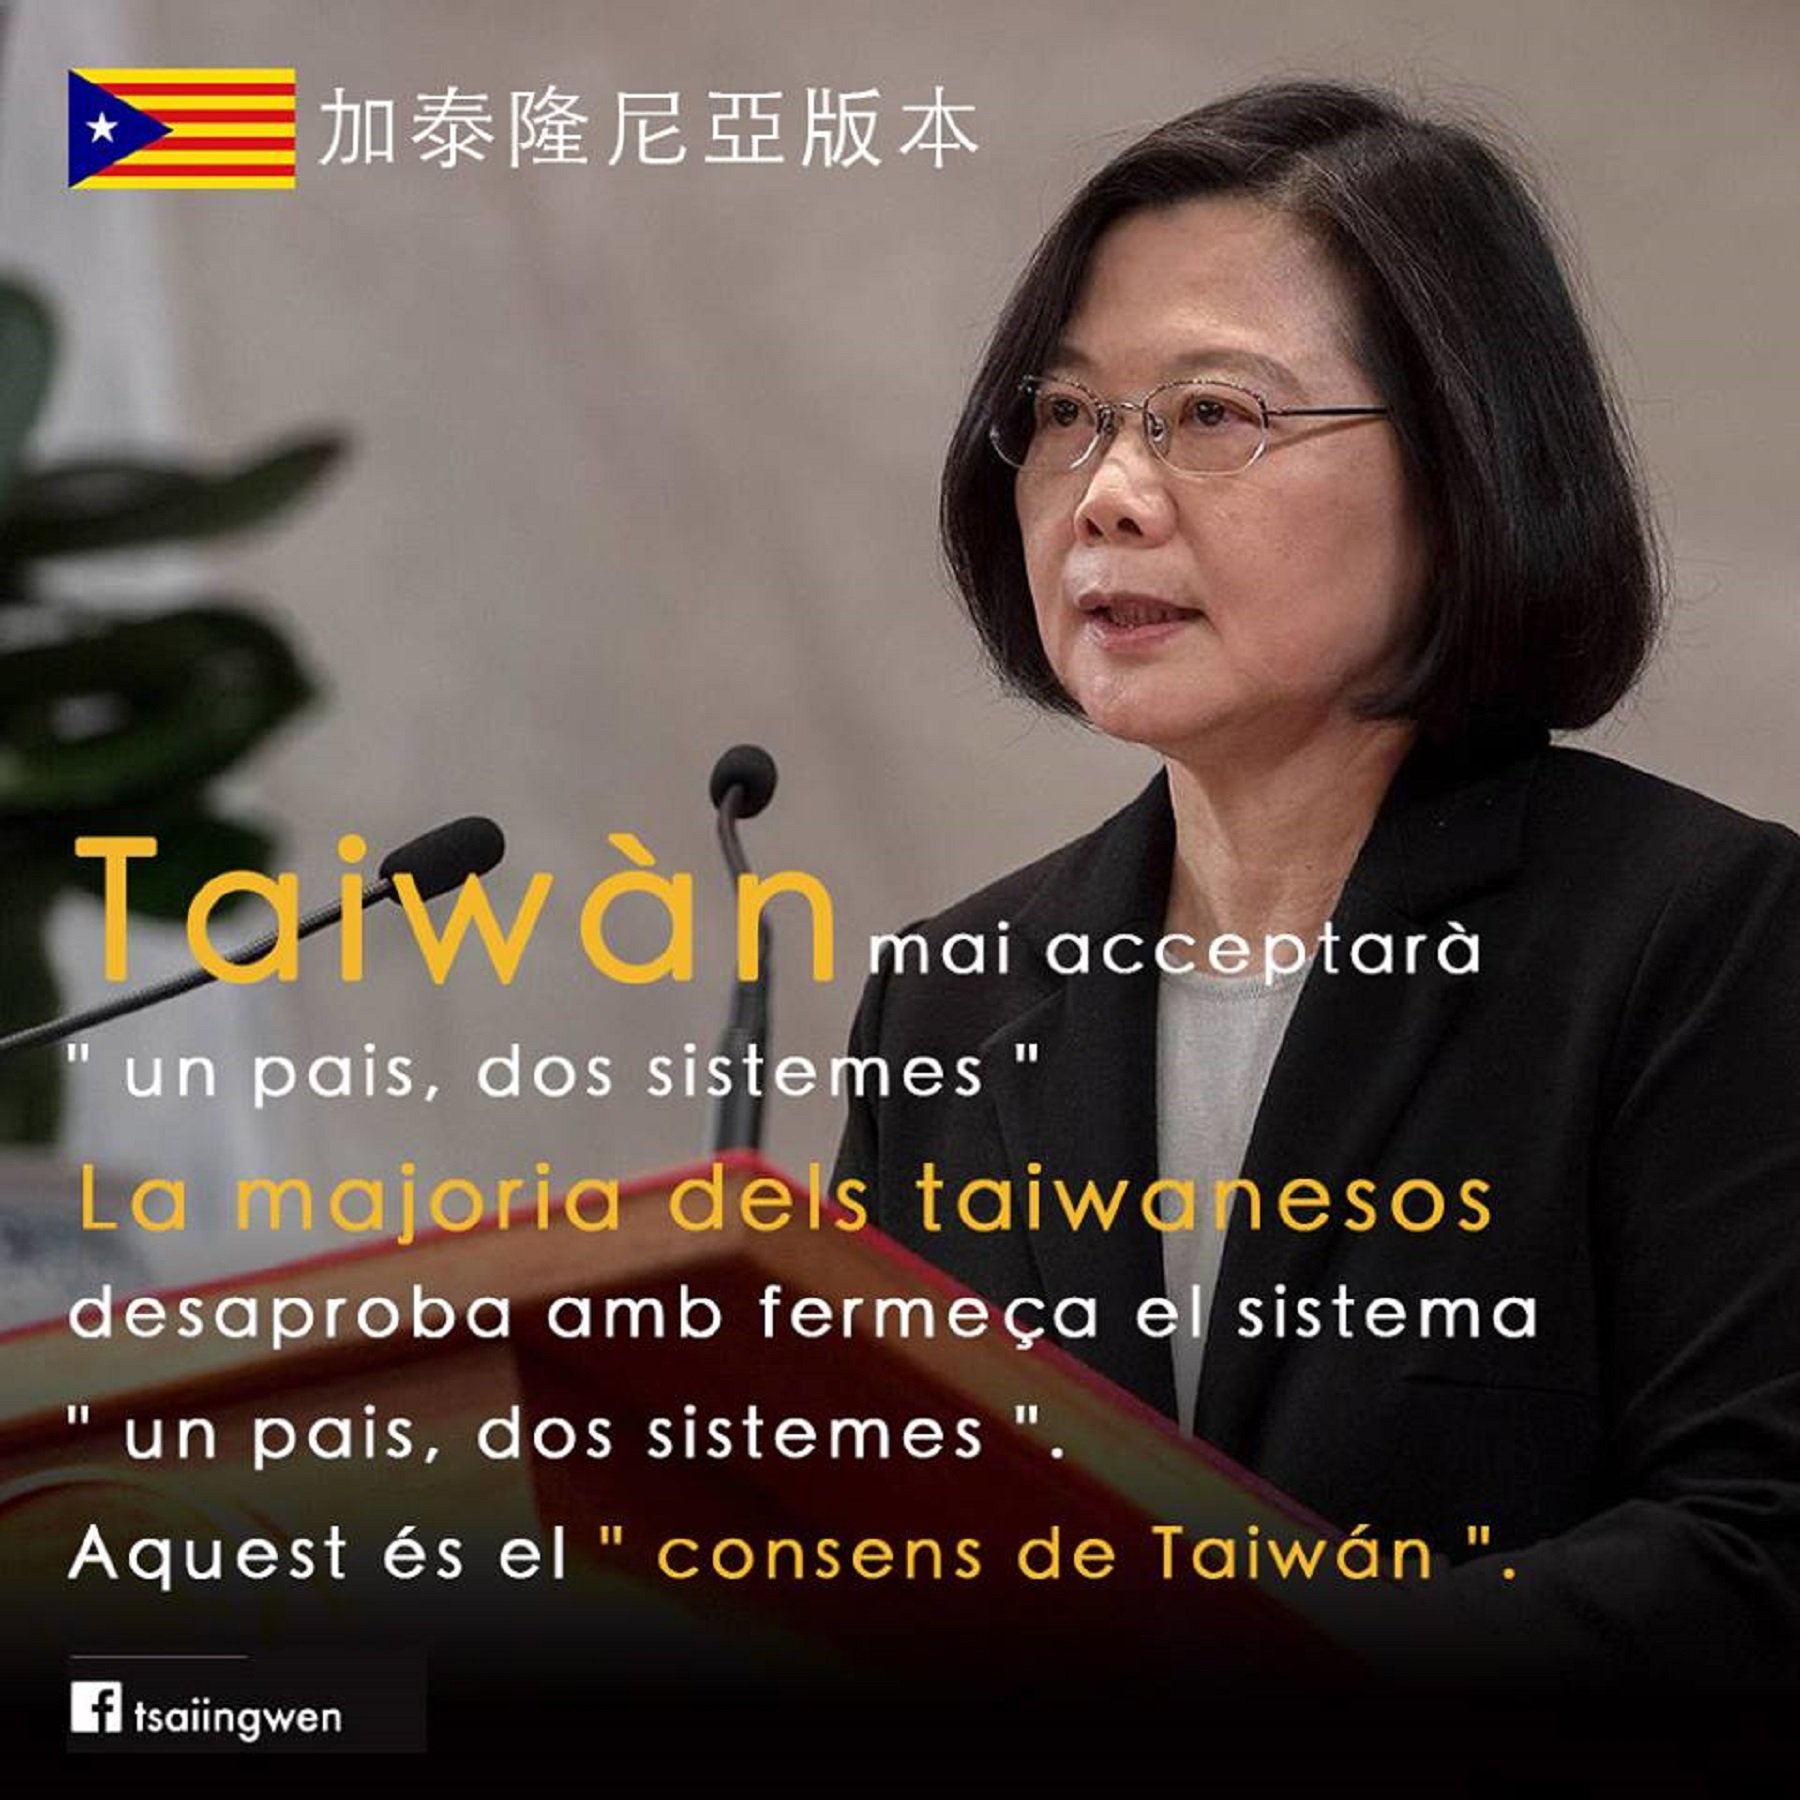 The Taiwanese president's defiant message to China in Catalan